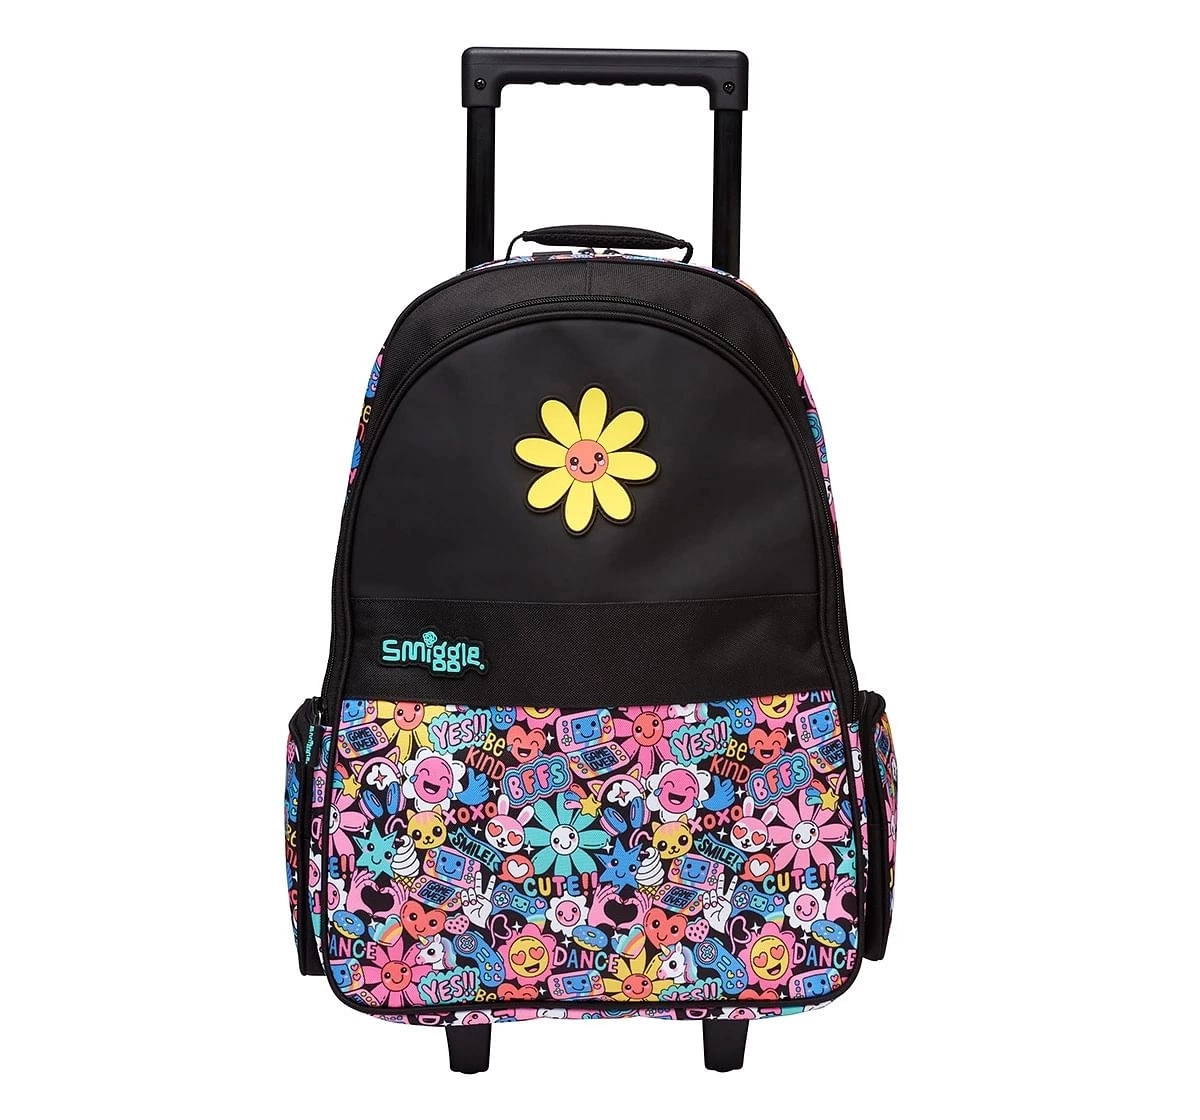 Smiggle Bright Side Trolley With Light Up Wheels for Kids 3Y+, Black